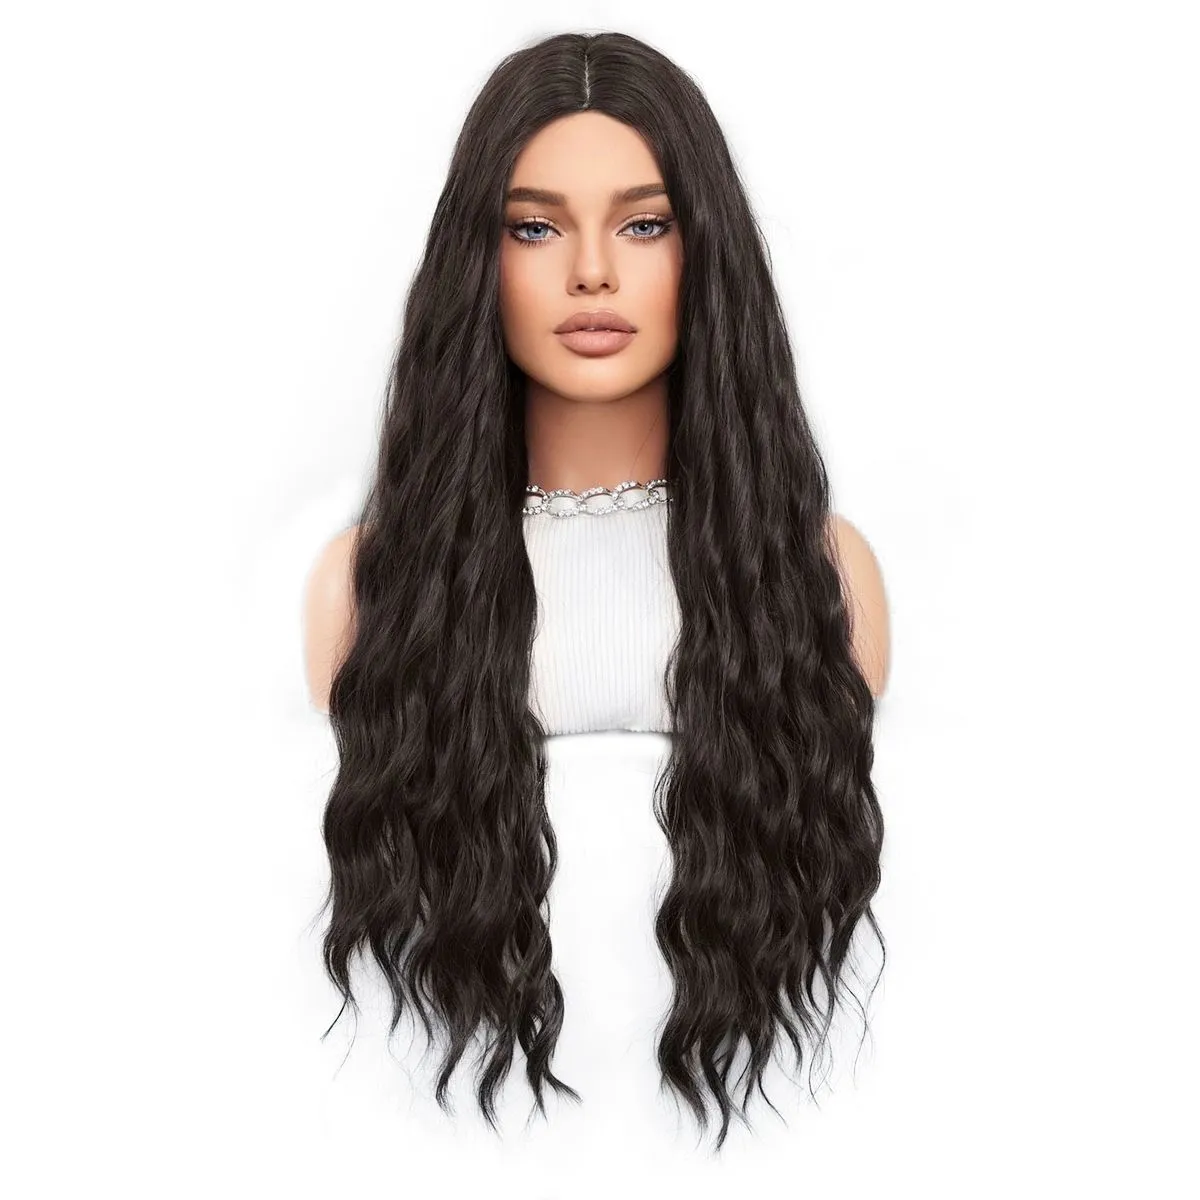 Wholesale wool curly Hair Black blonde Wigs 72cm long hair female large wave in water ripple fast shipping